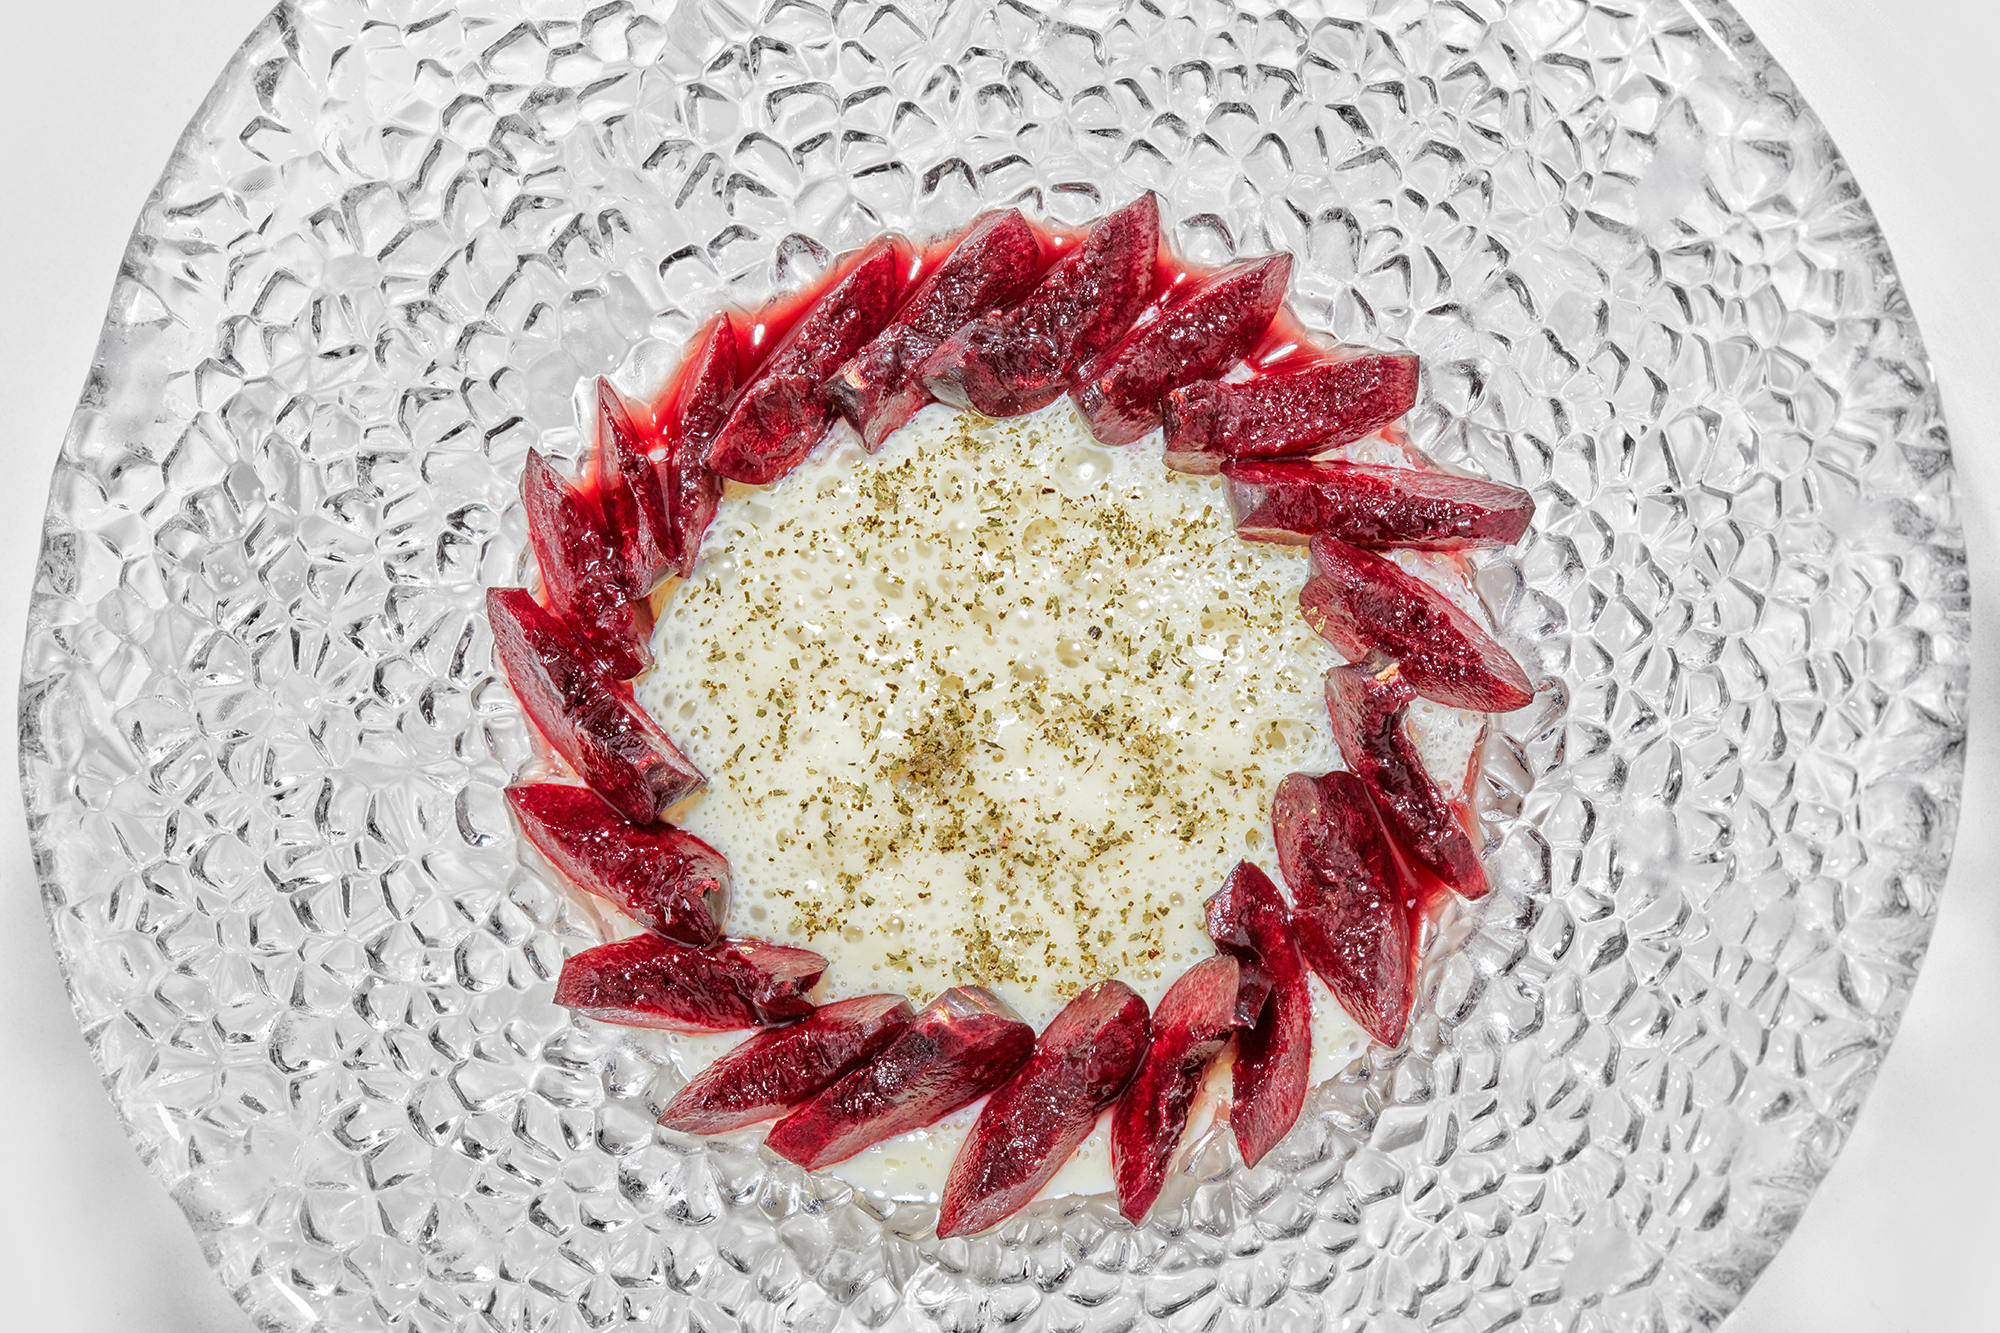 Cherry paste with braised cherry juice and aerated milk of rue and lemon thyme